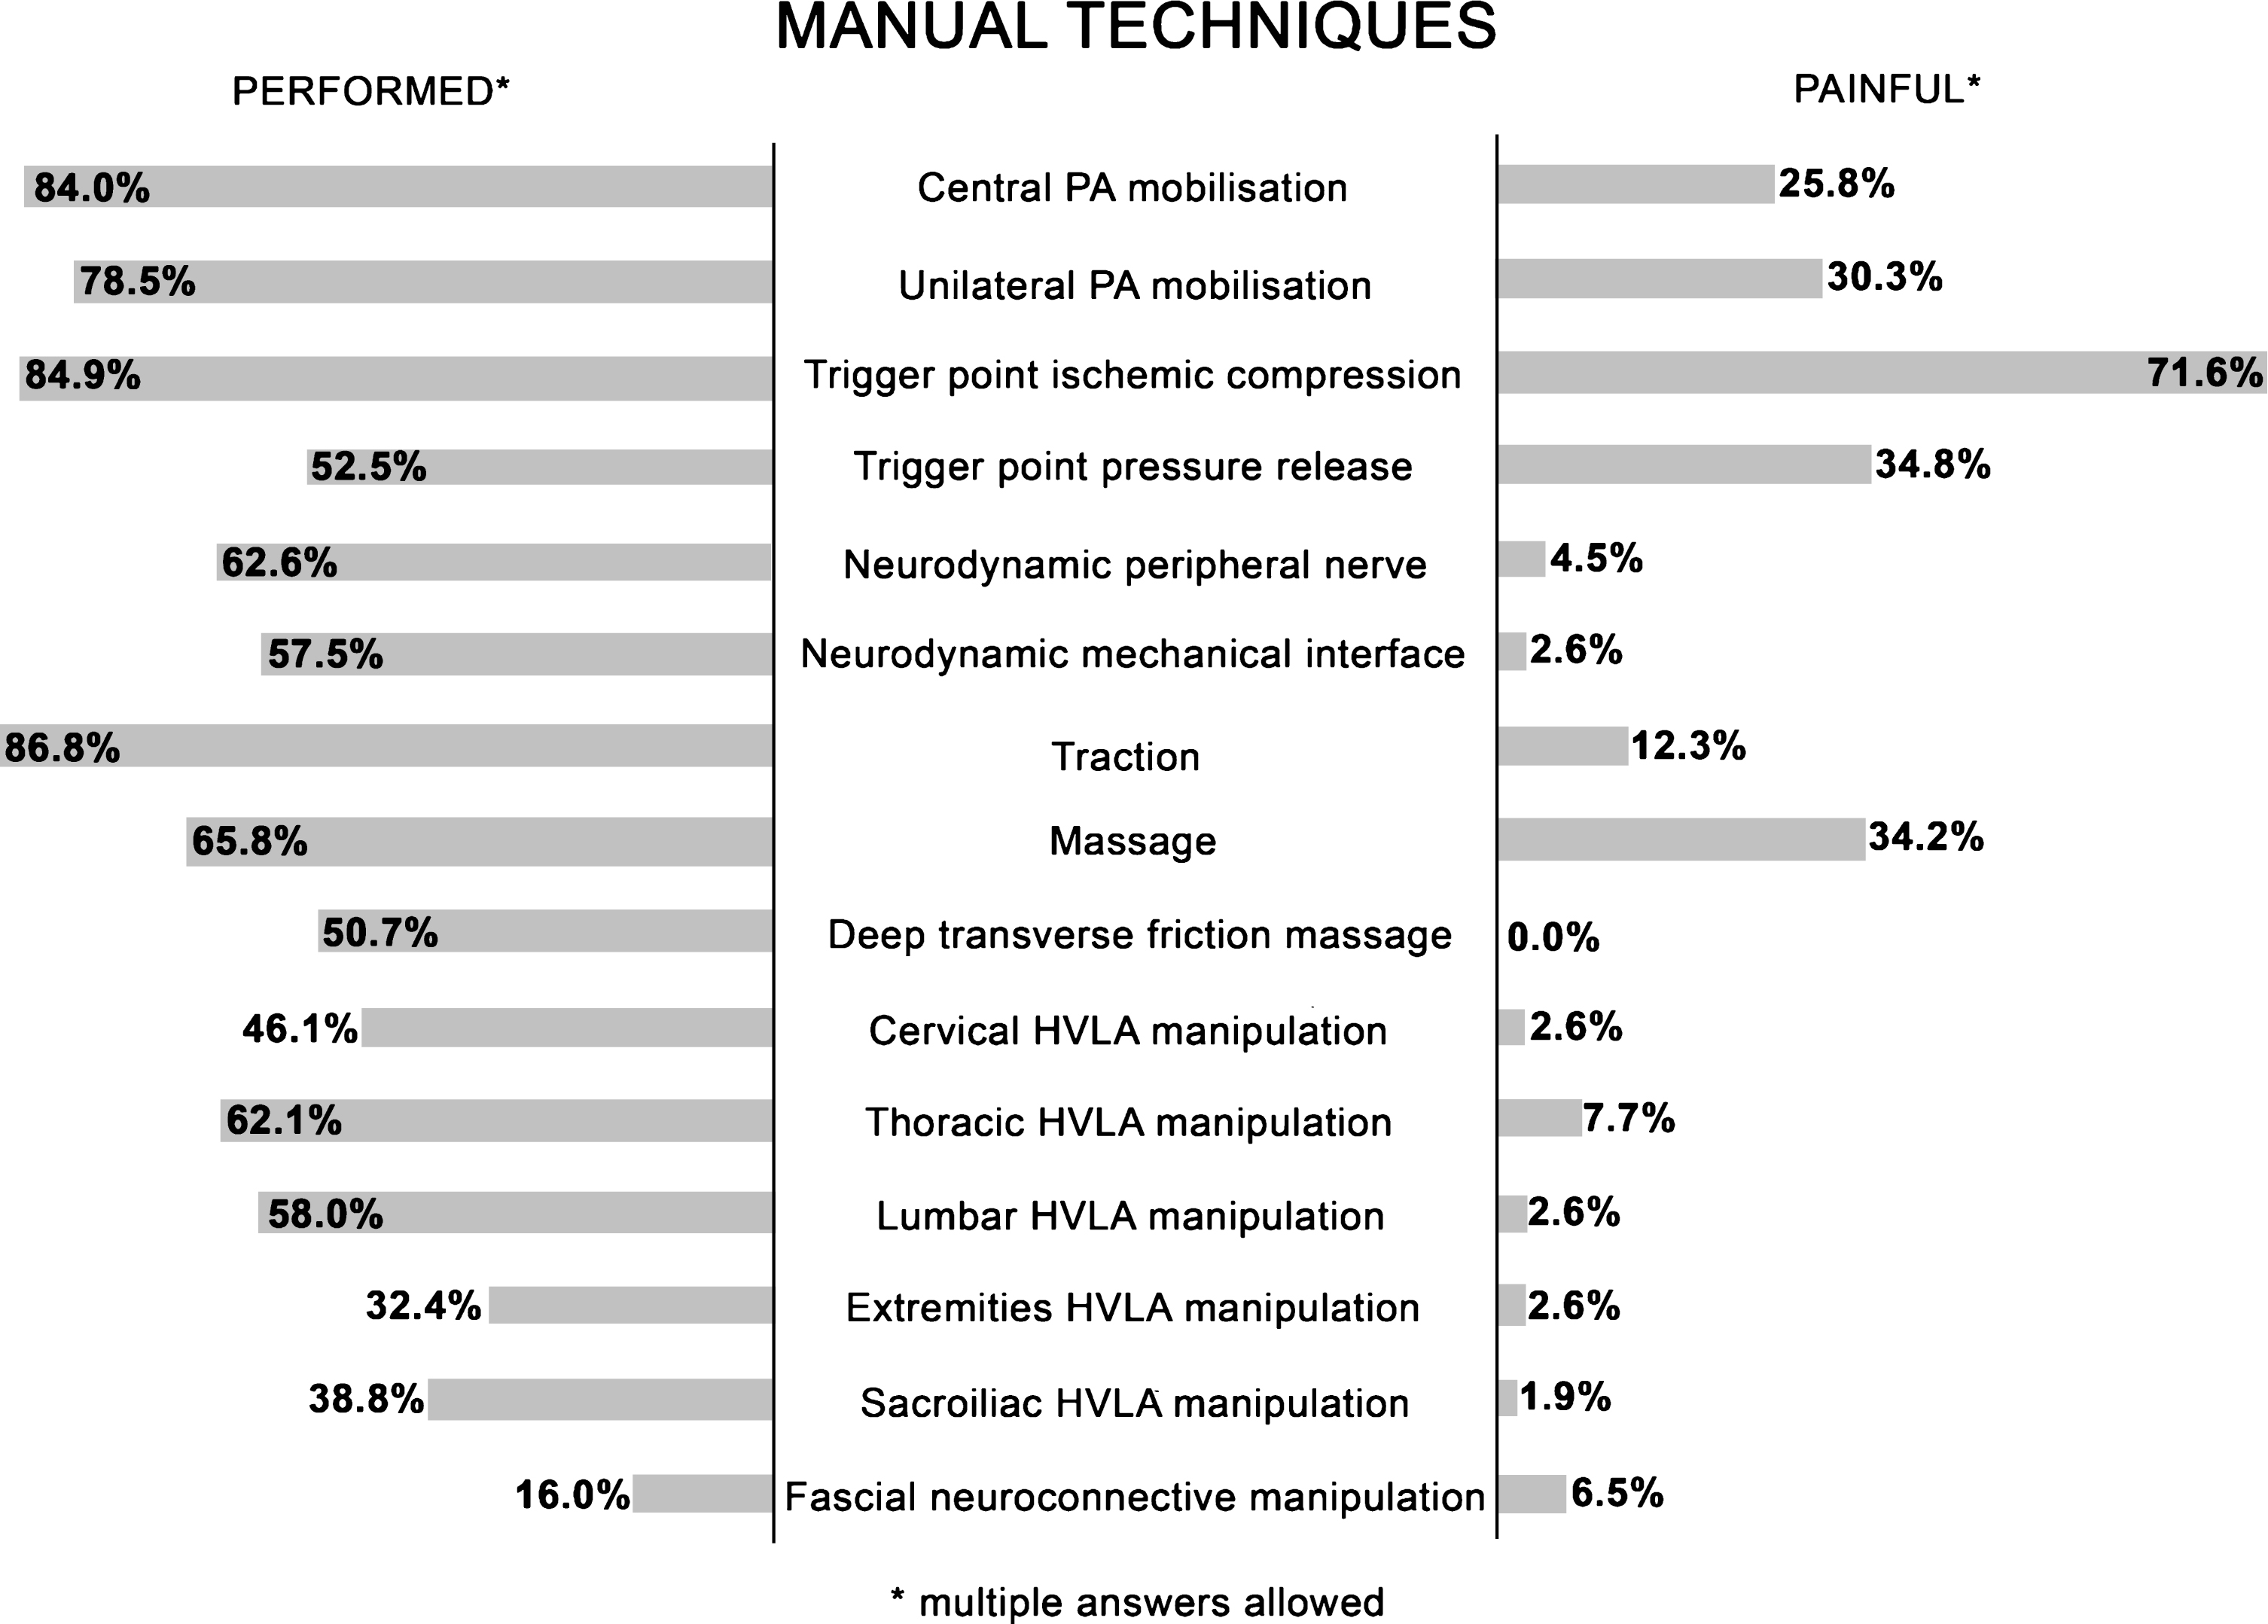 Performed and painful manual techniques: compared percentages. PA = postero-anterior; HVLA = high velocity low amplitude.